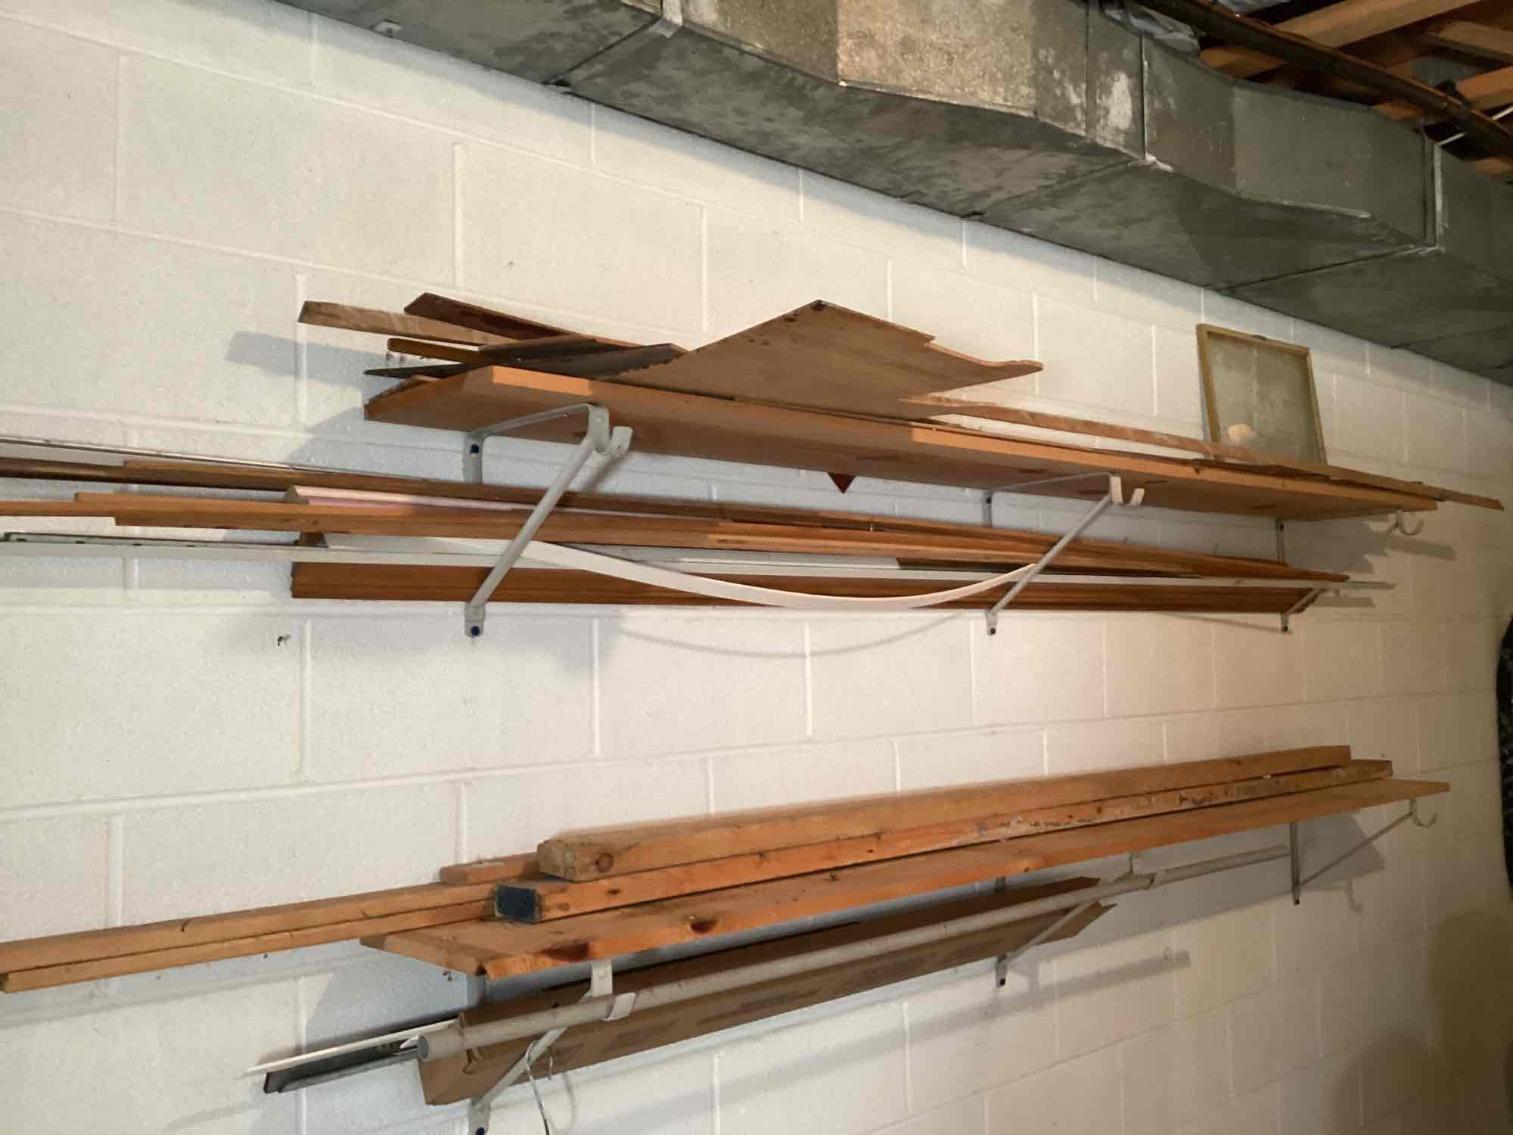 Image for All Wood in Basement - Lumber, Scraps, and Plywood Pieces 